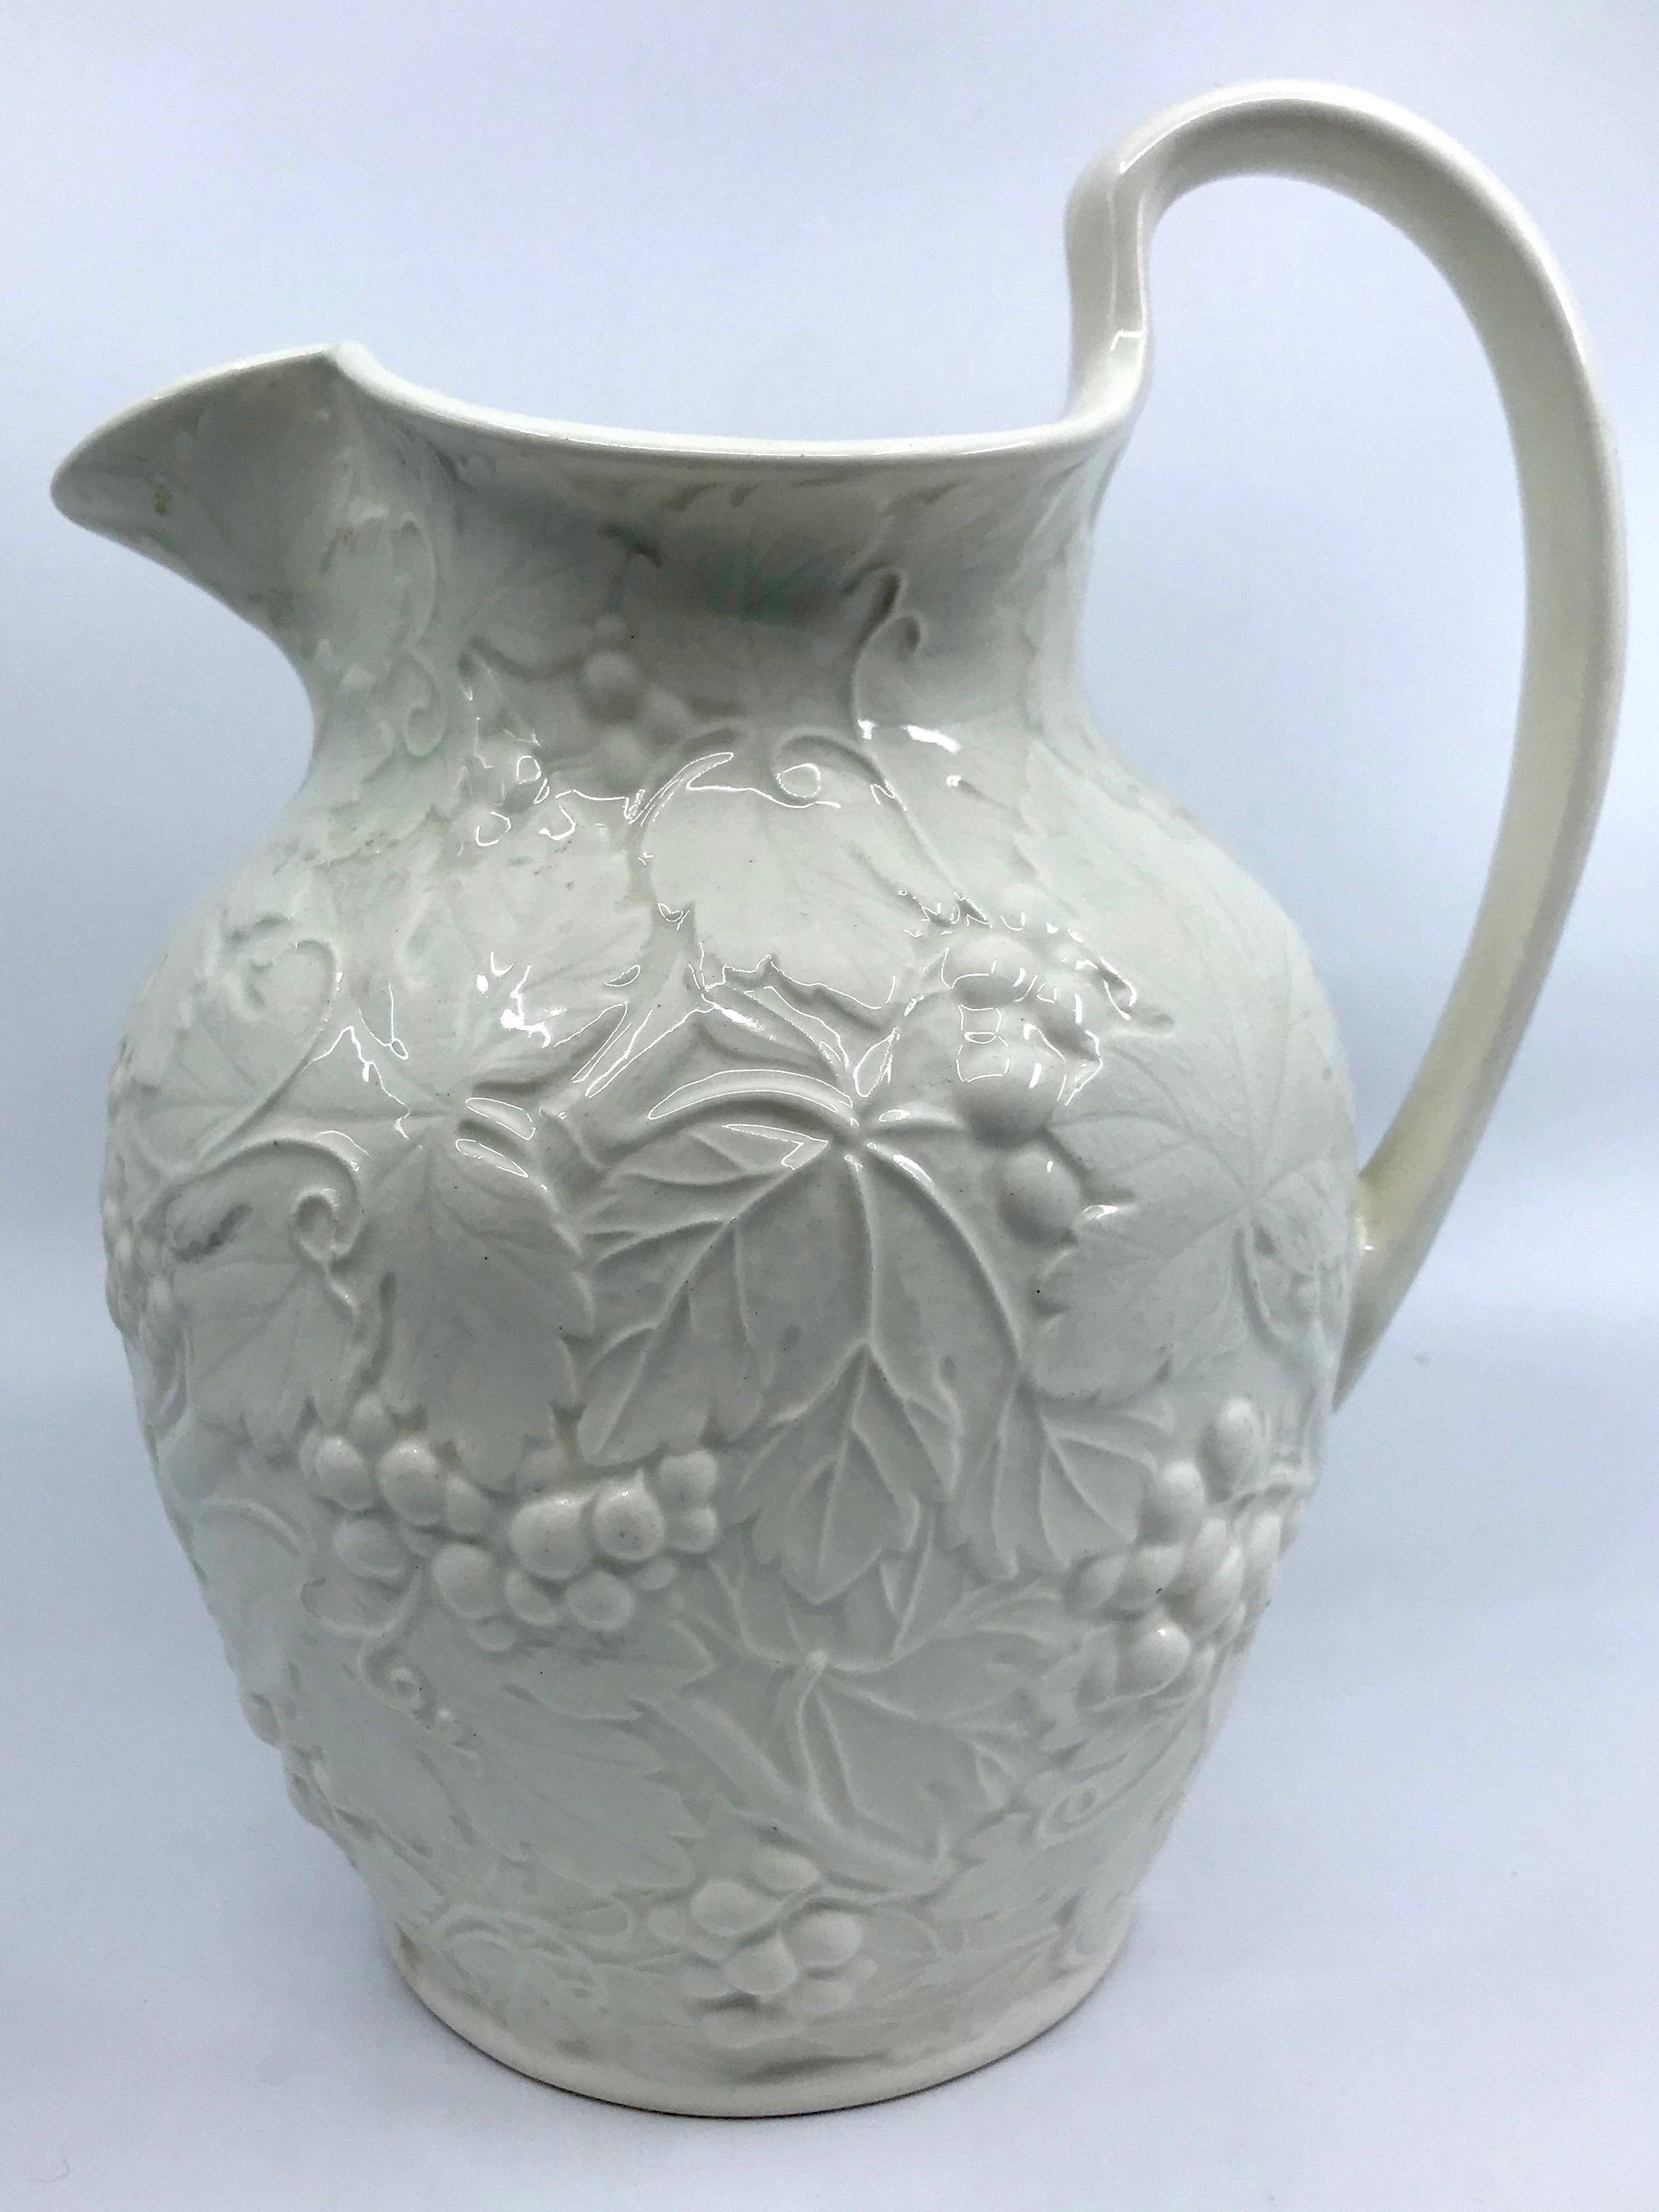 Large white Wedgwood grape-leaf pitcher. Vintage off-white pitcher in an all-over raised grape-leaf and grape cluster design. Green markings for Wedgwood, England circa 1940’s. 
Dimensions: 7.13